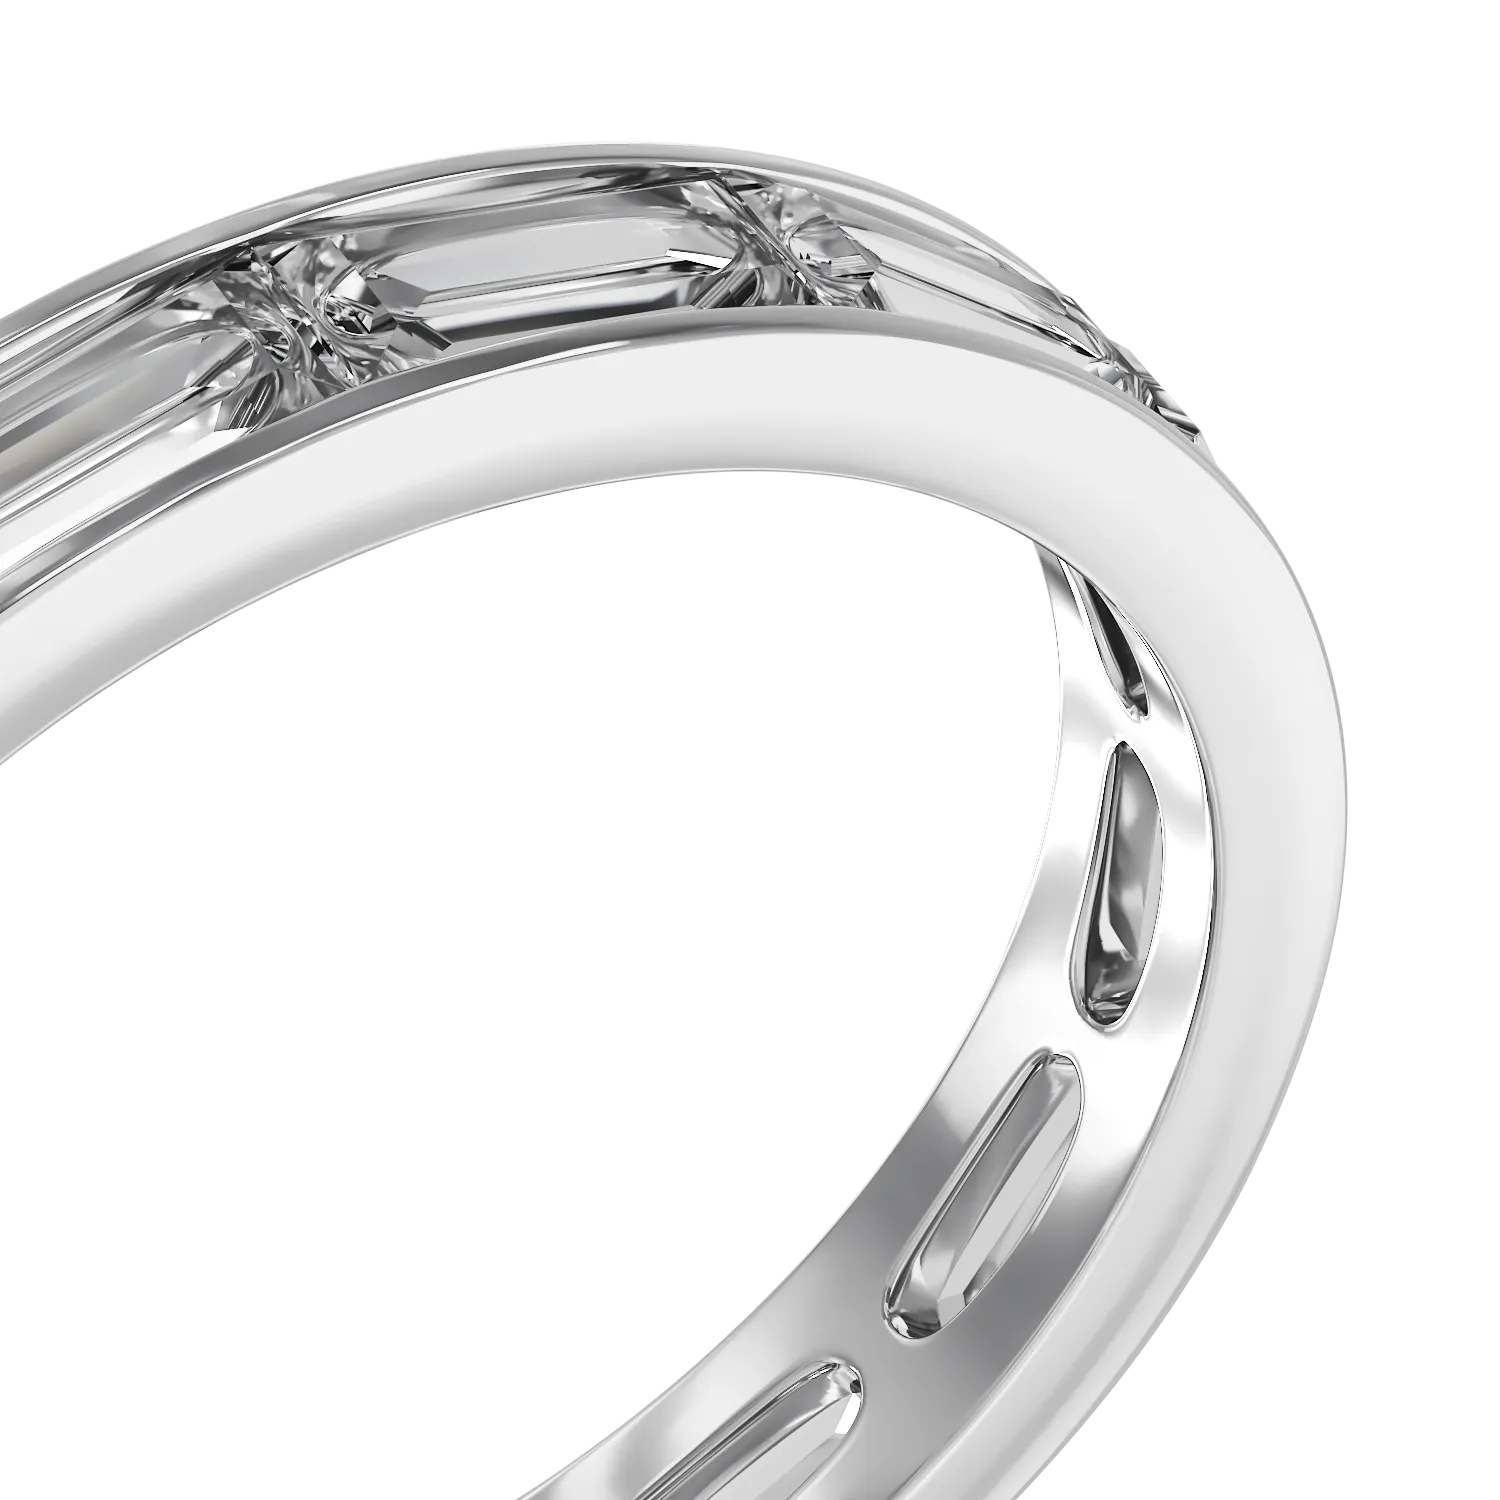 Eternity ring in white gold with 1.75ct diamonds